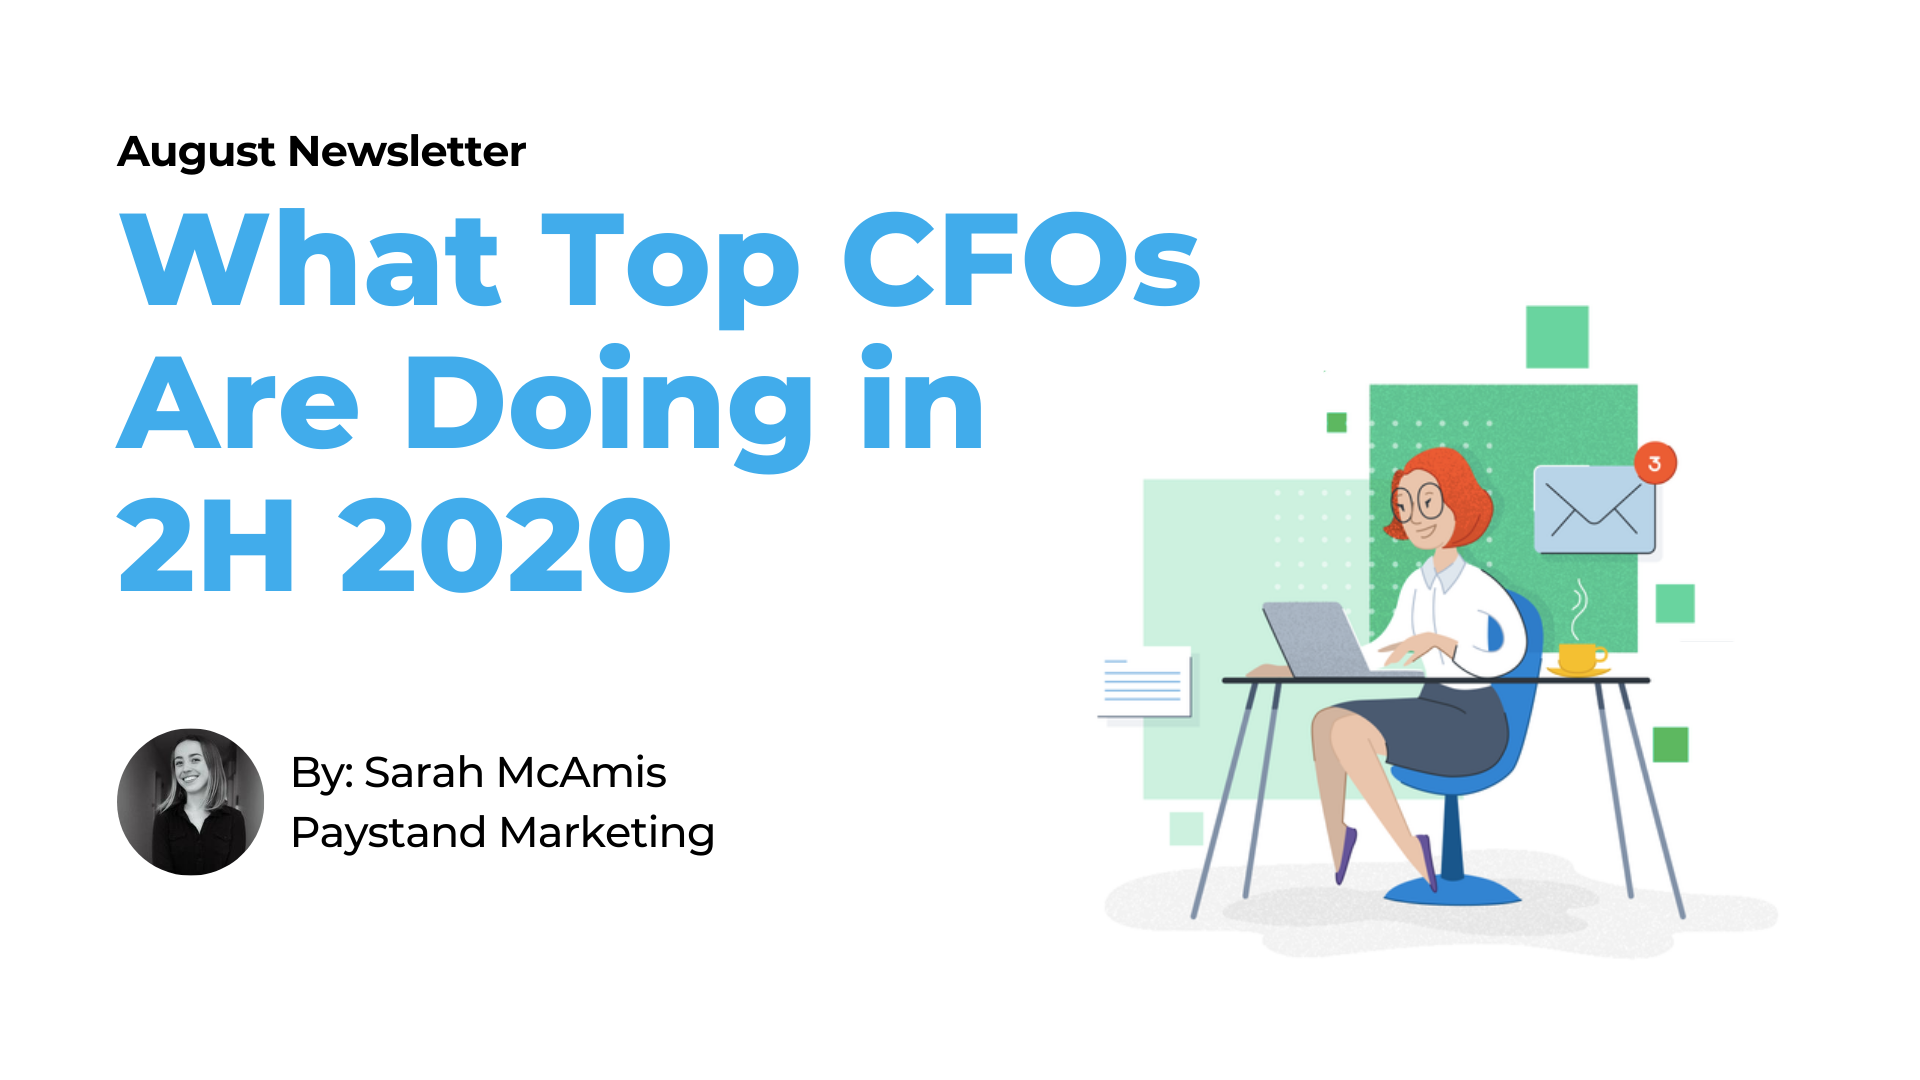 Issue #05: What Top CFOs Are Doing in 2H 2020